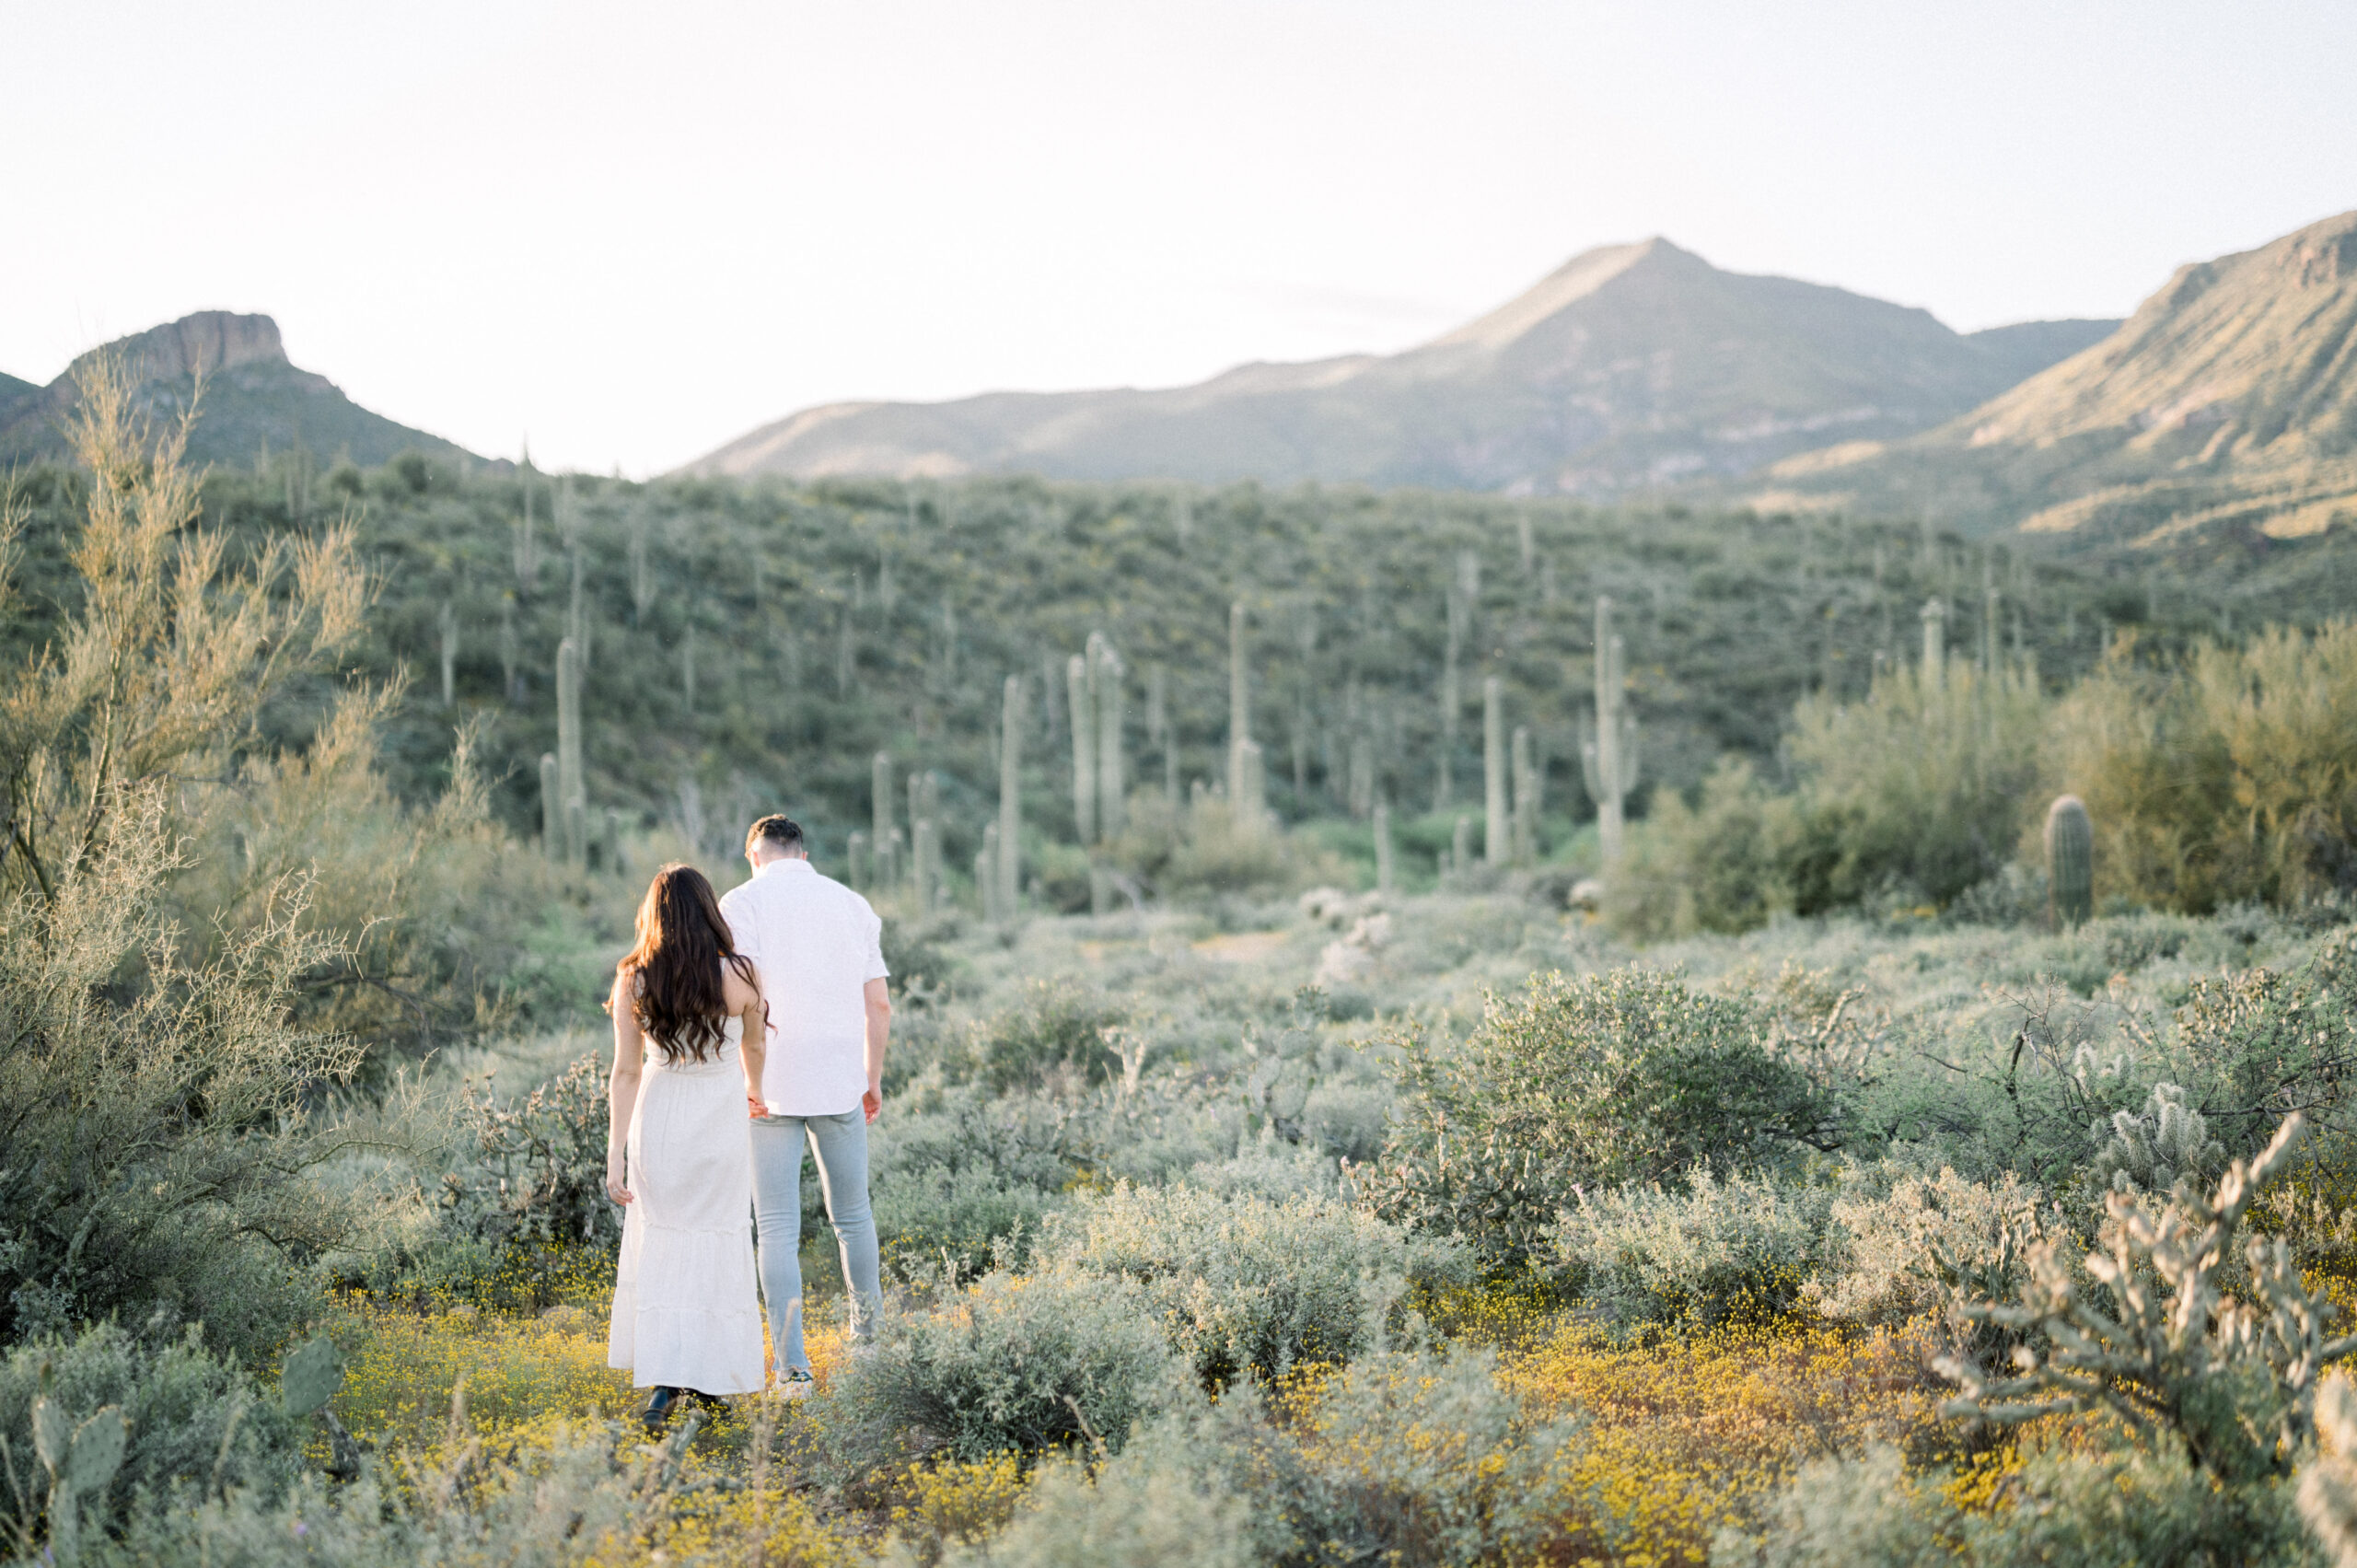 Kennedy and Jareds glowy desert engagement session was one for the books. After a heavy rainfall, we had the most beautiful scenery!